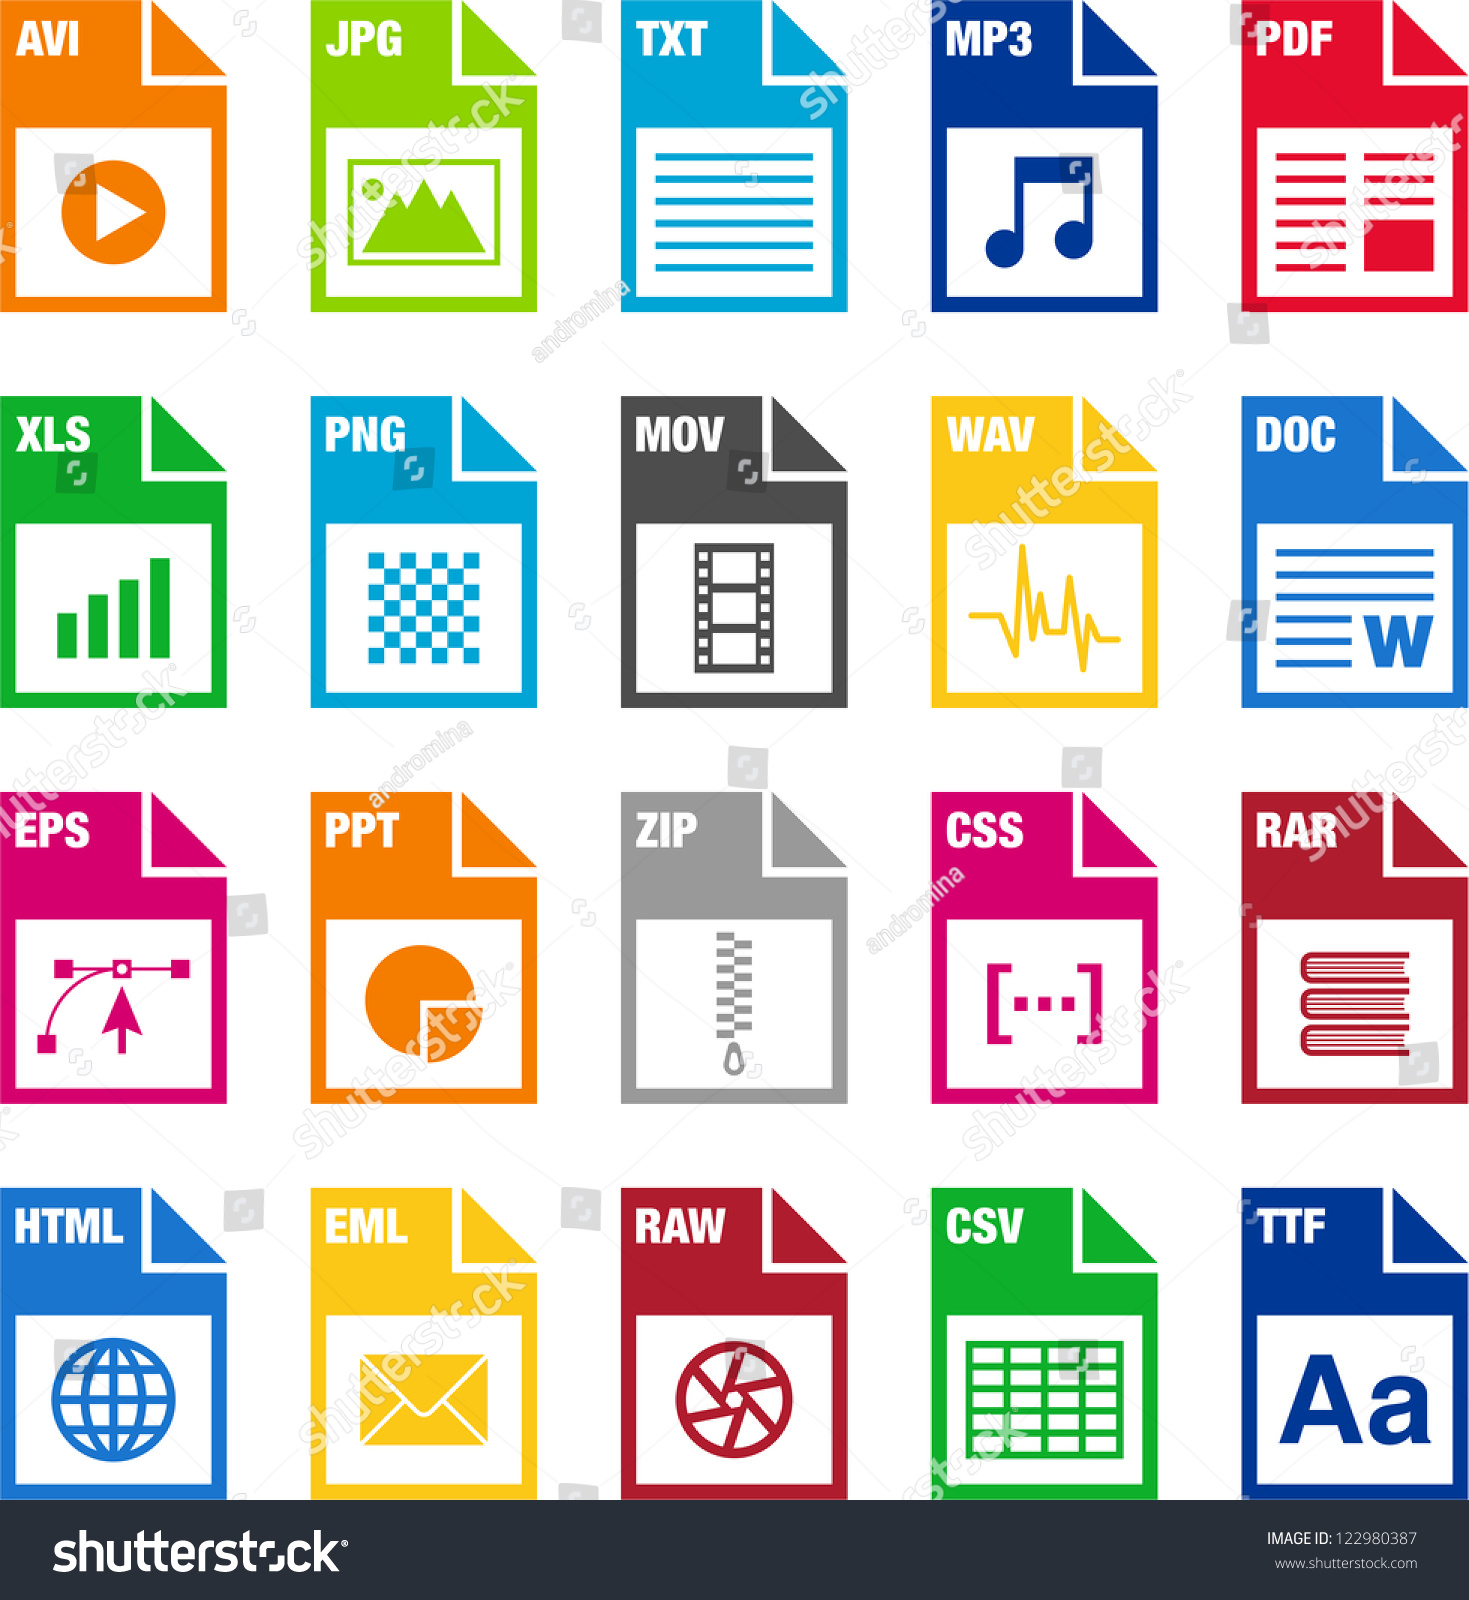  File  Types  Icons  Stock Vector 122980387 Shutterstock